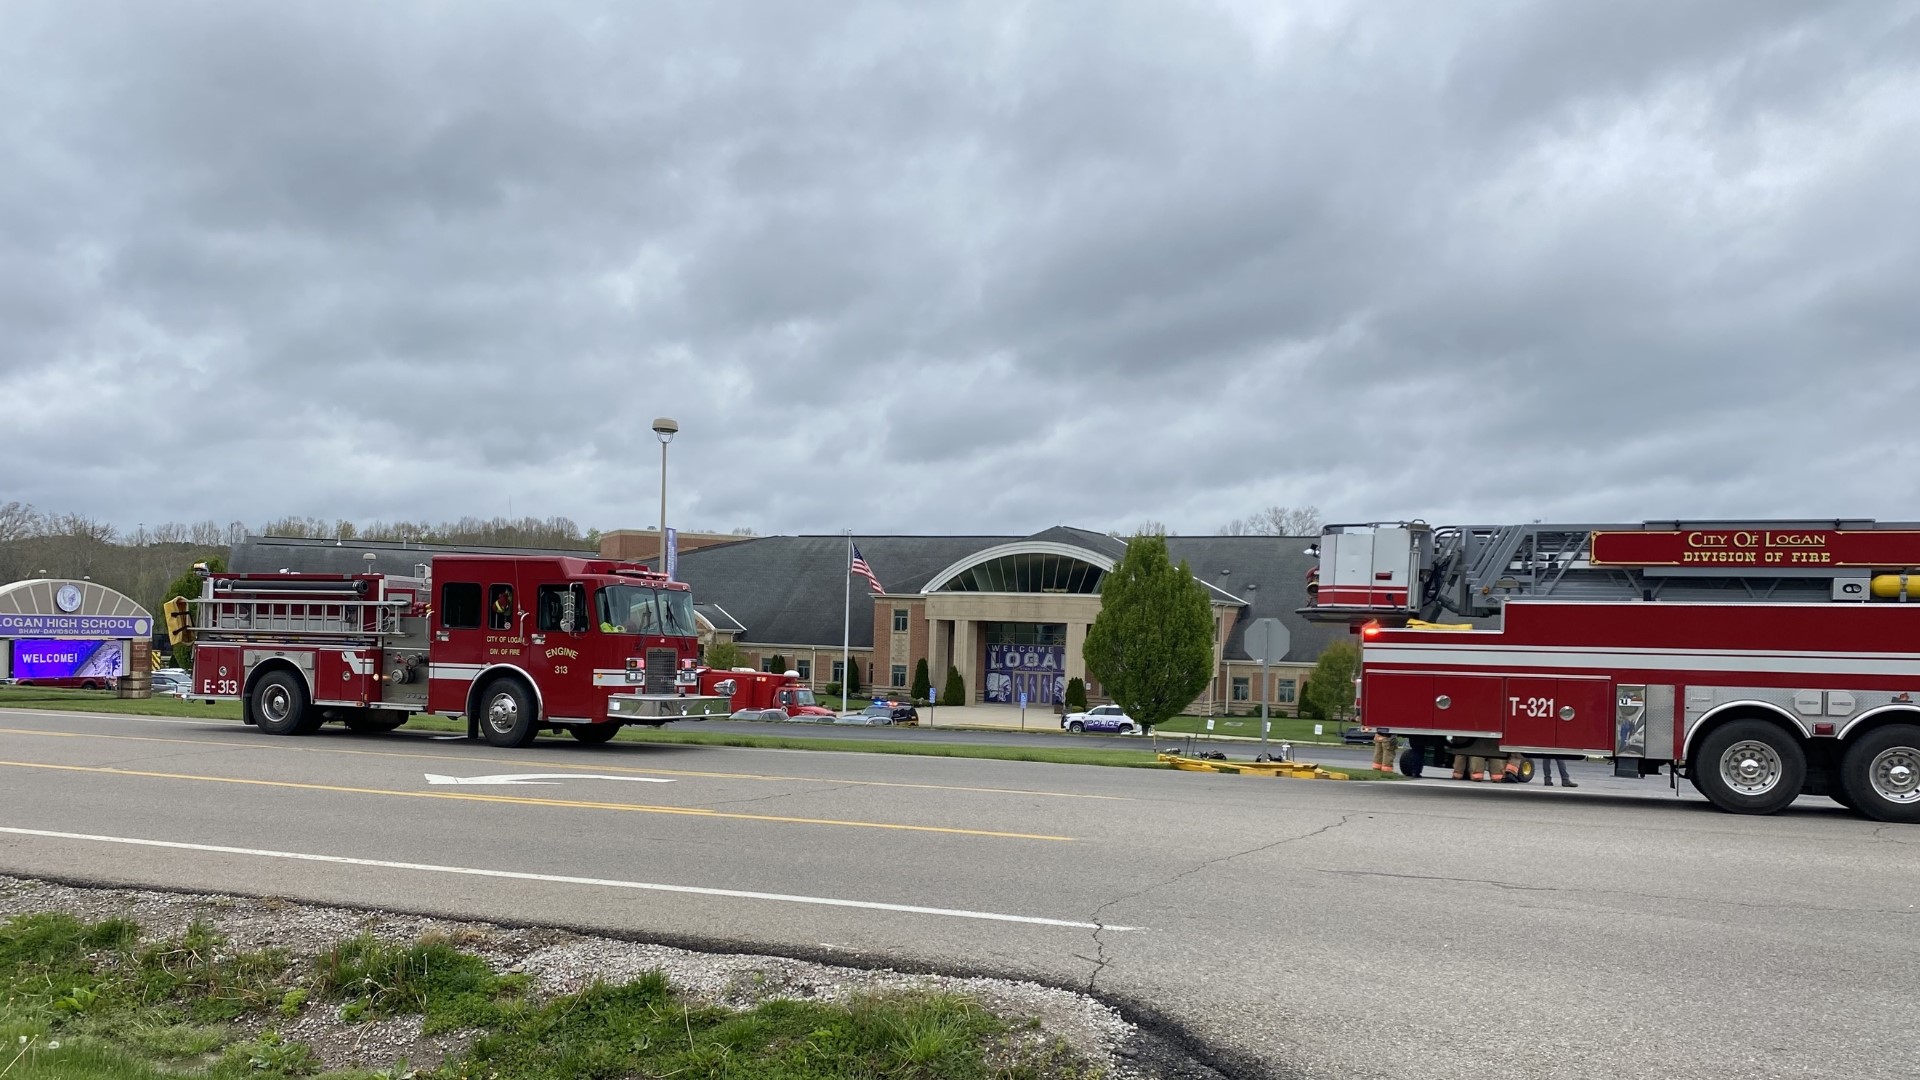 Authorities were called to Logan High School after a fire alarm was pulled and a "suspicious" object made to look like an explosive device was found.